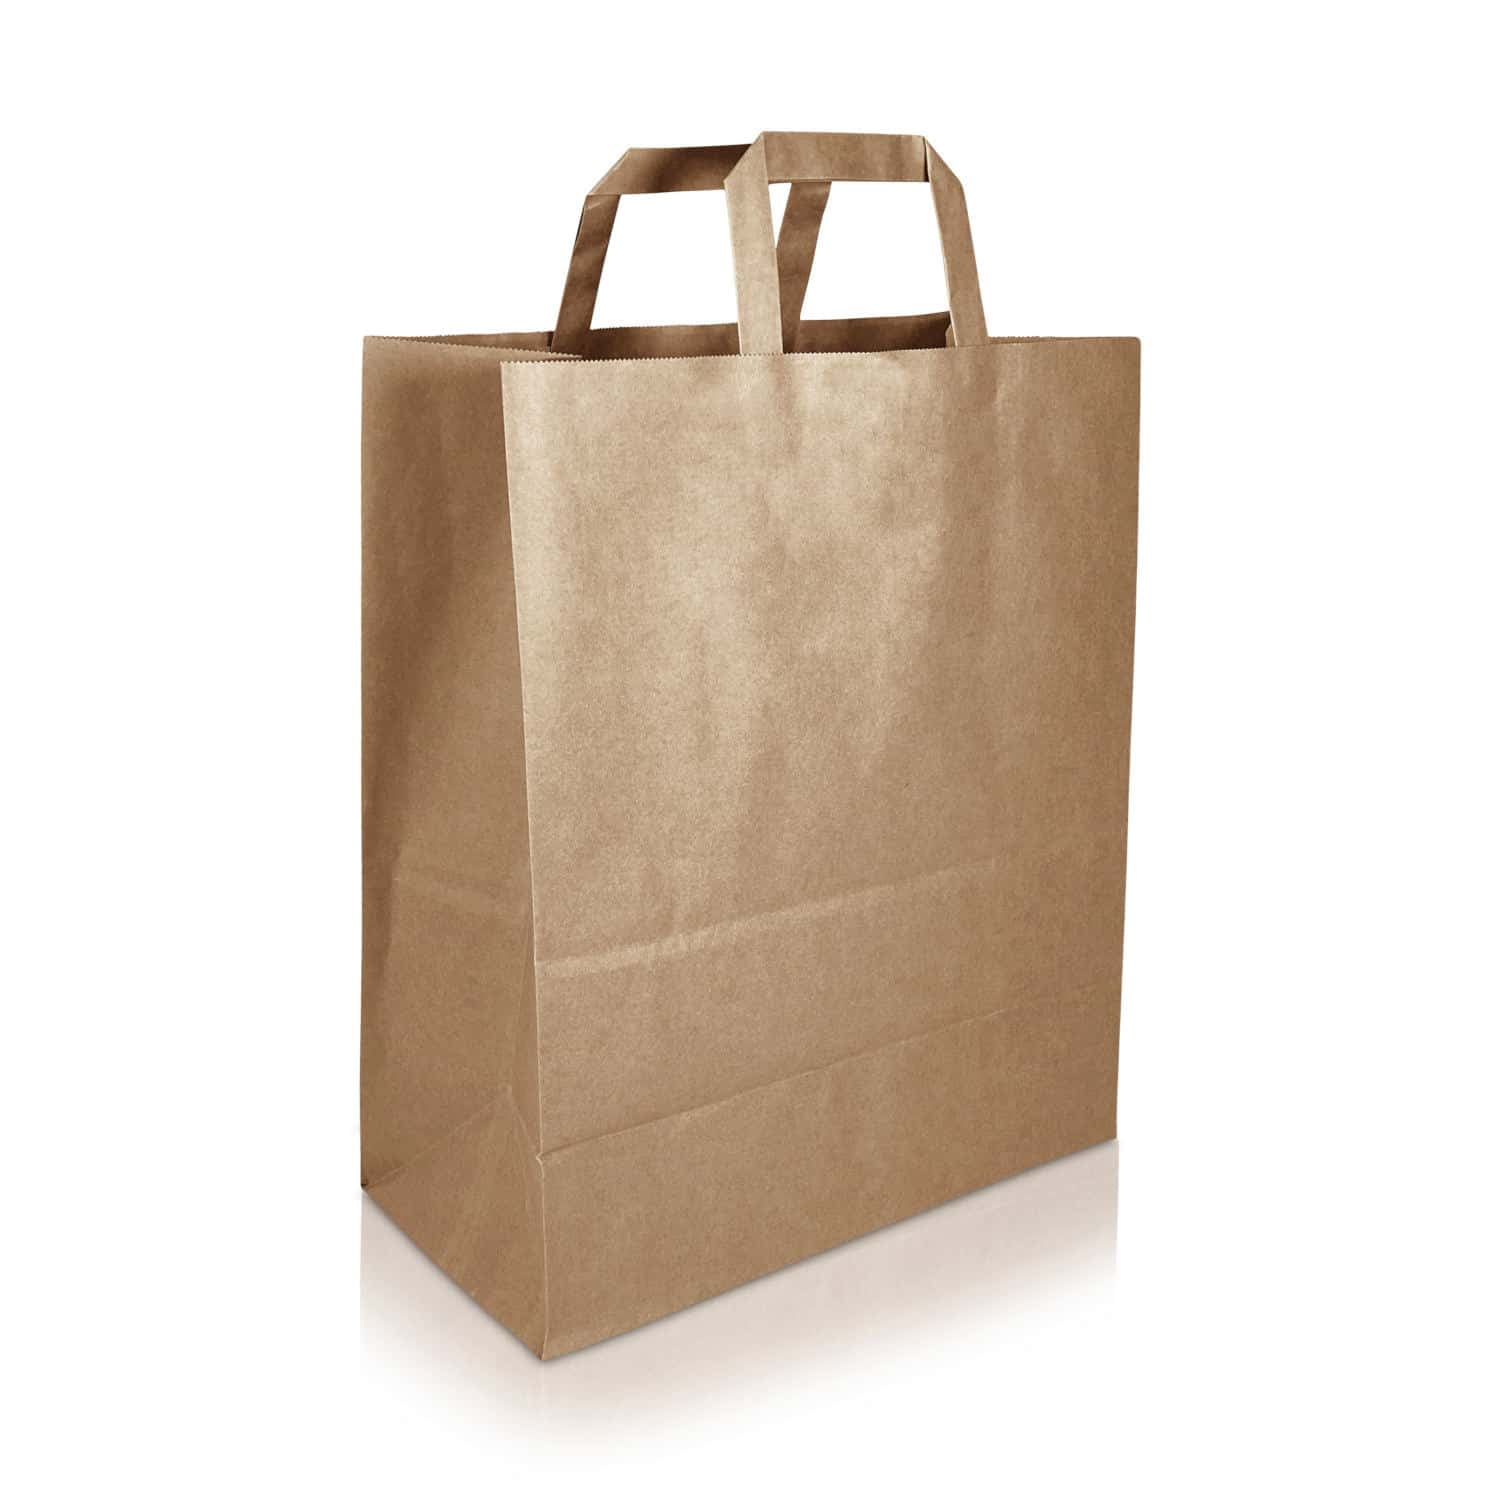 4.3 White Tengcong Kraft Paper Bags Gift Bags with Handles Shopping Durable Reusable Merchandise Retail Bags 25Pcs 12.6 9.8